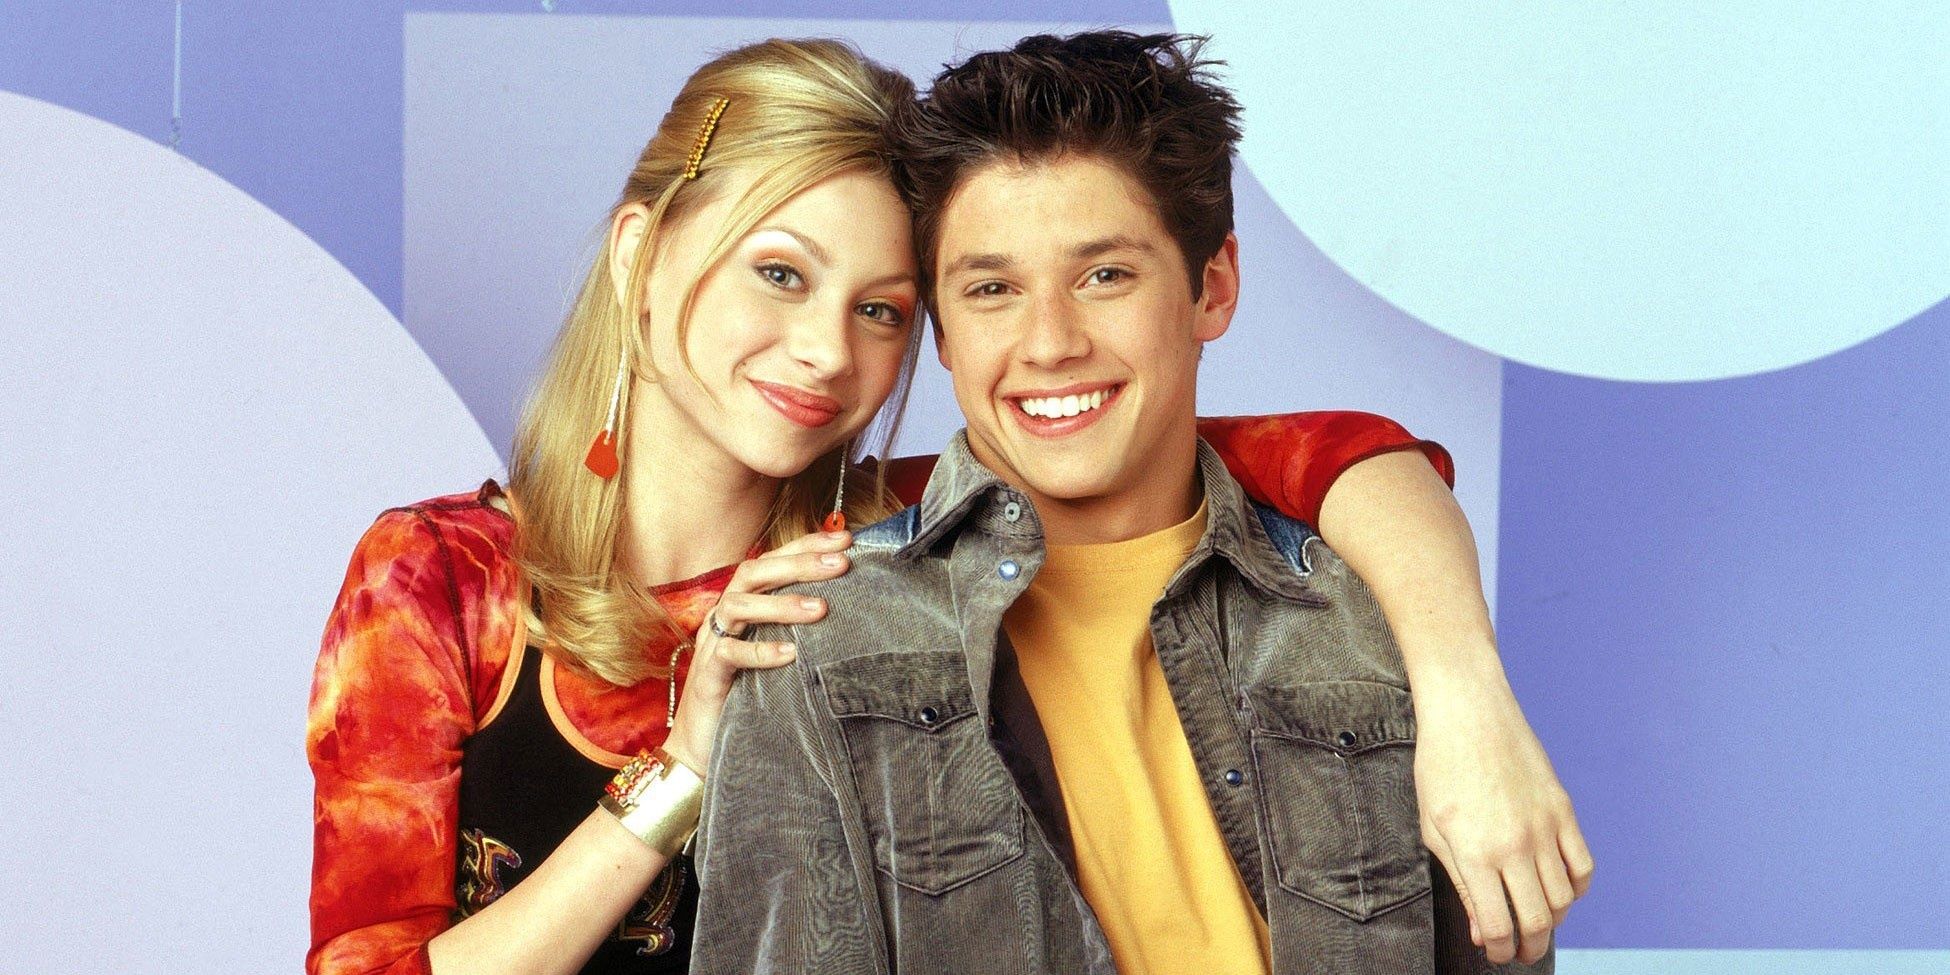 Keely rests her arm on the shoulder of a smiling Phil in a promo photo for Phil of the Future